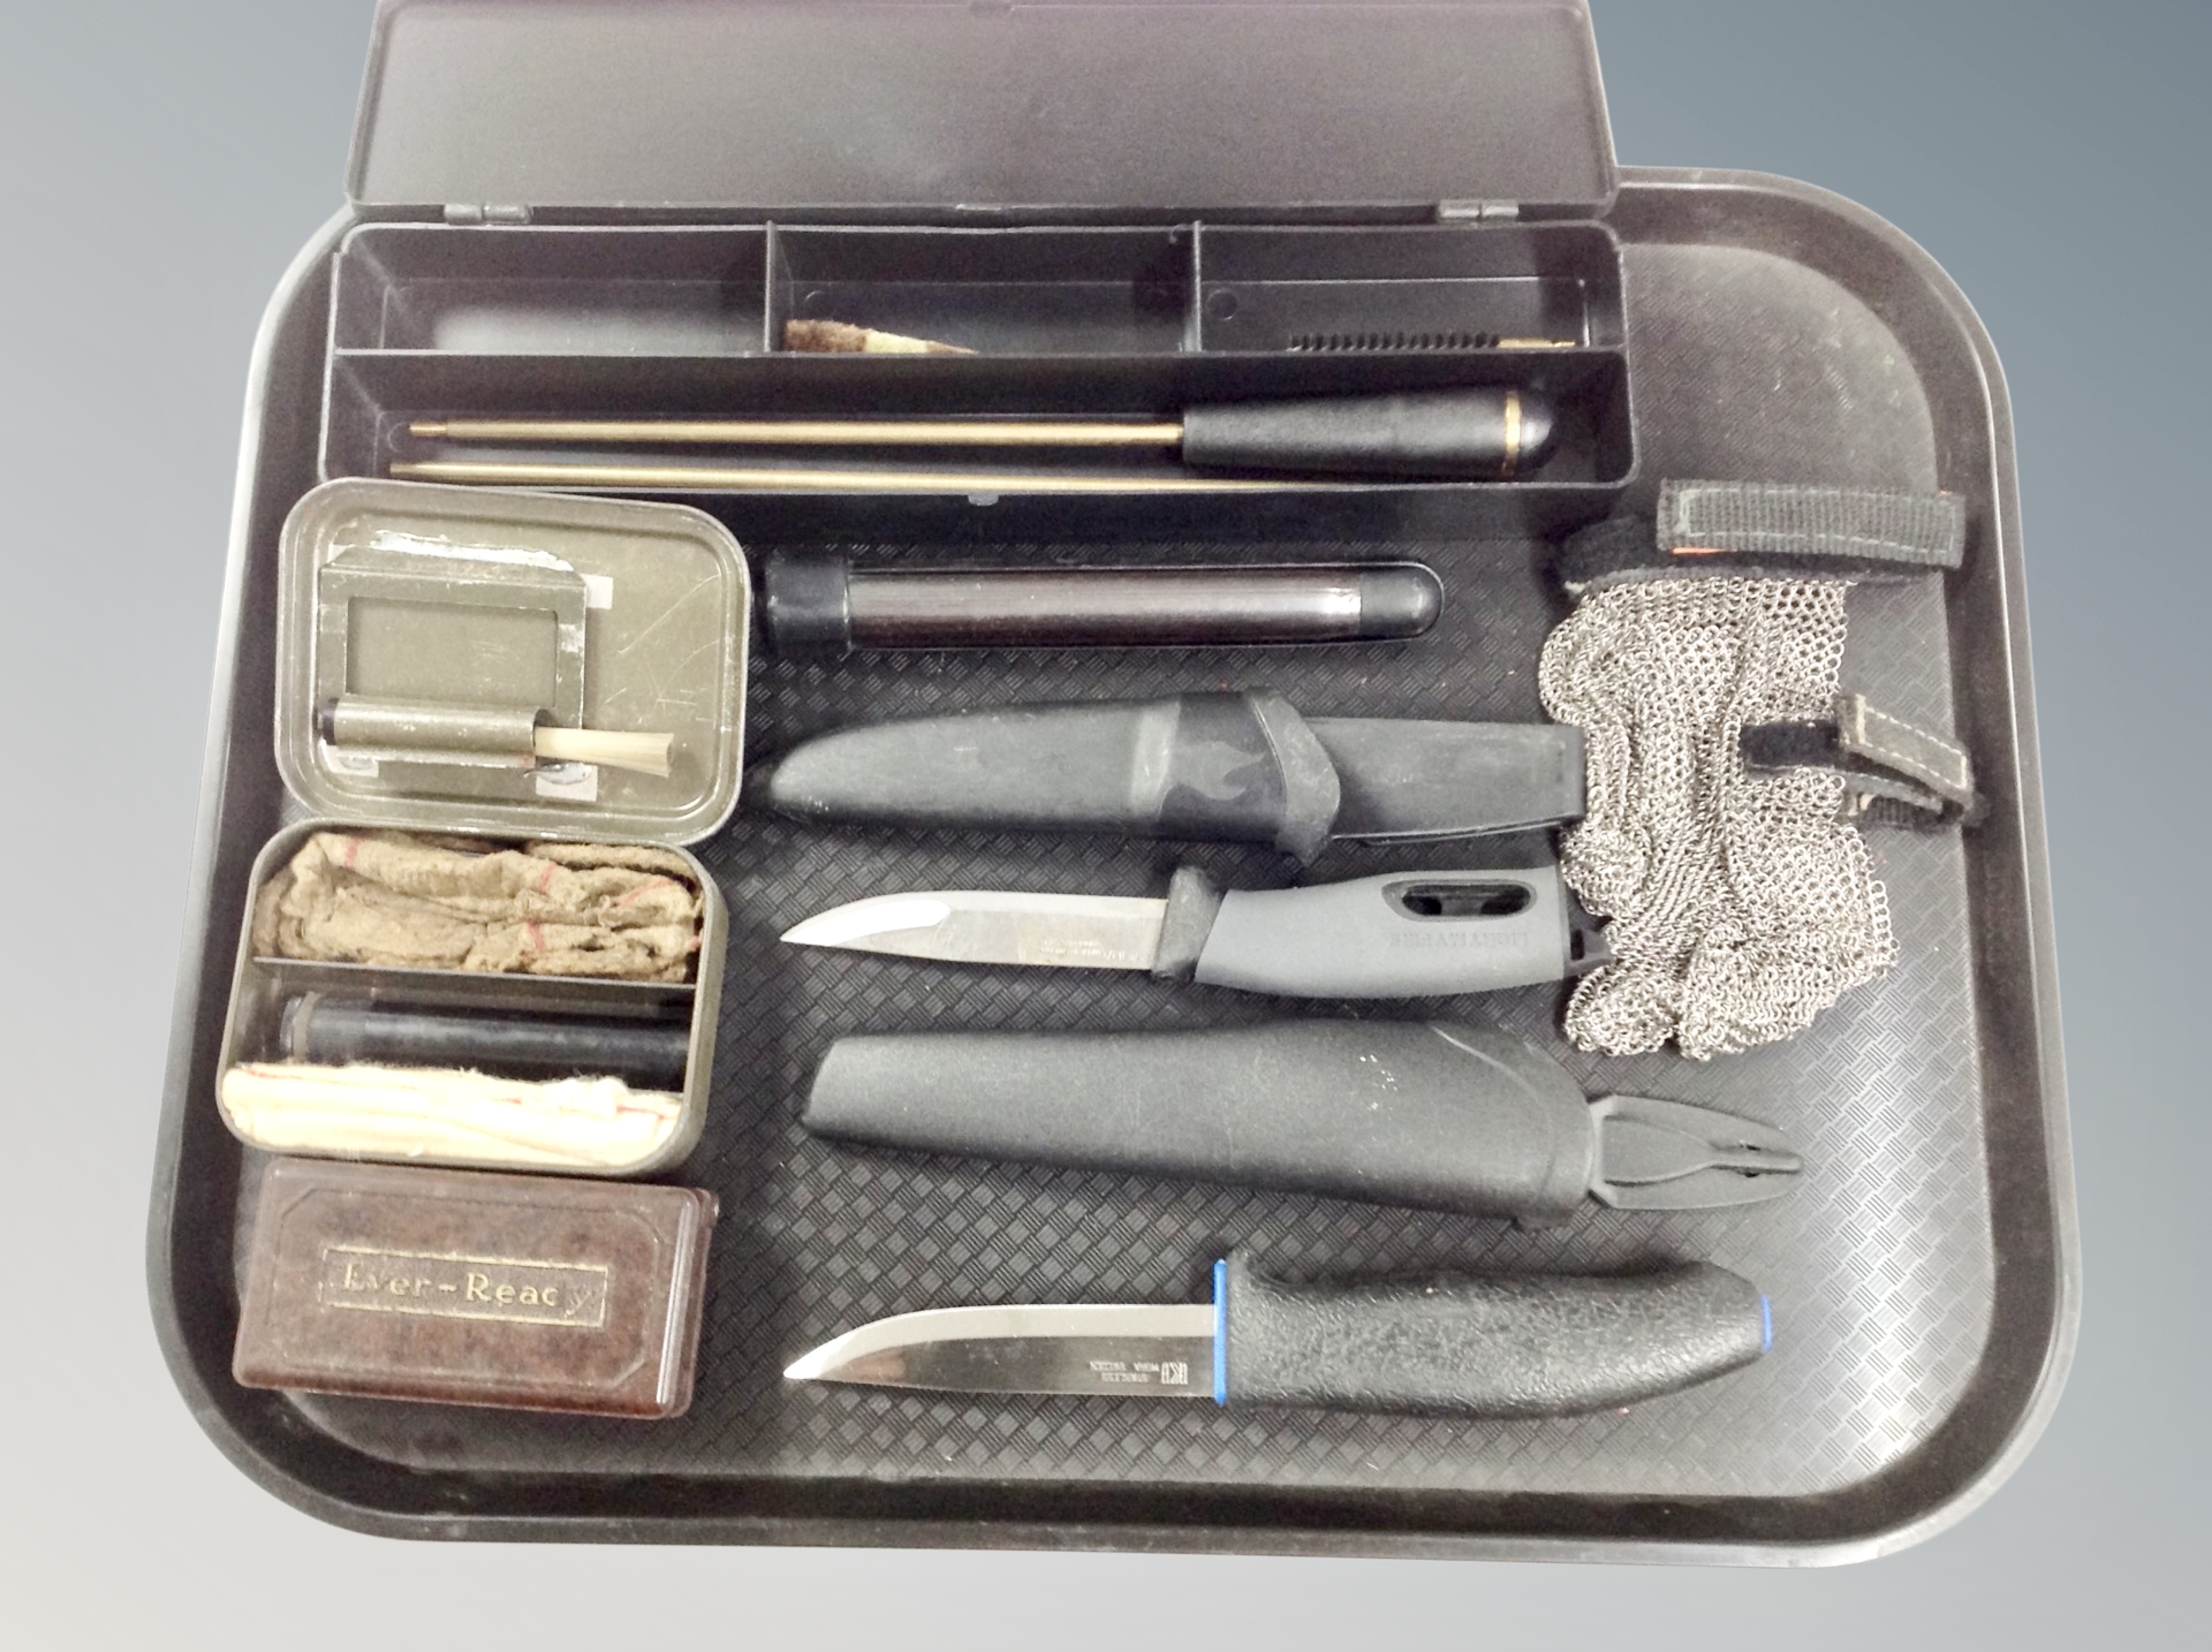 A tray containing diving knives, Ever-Ready razor in Bakelite box, gun cleaning rod etc.